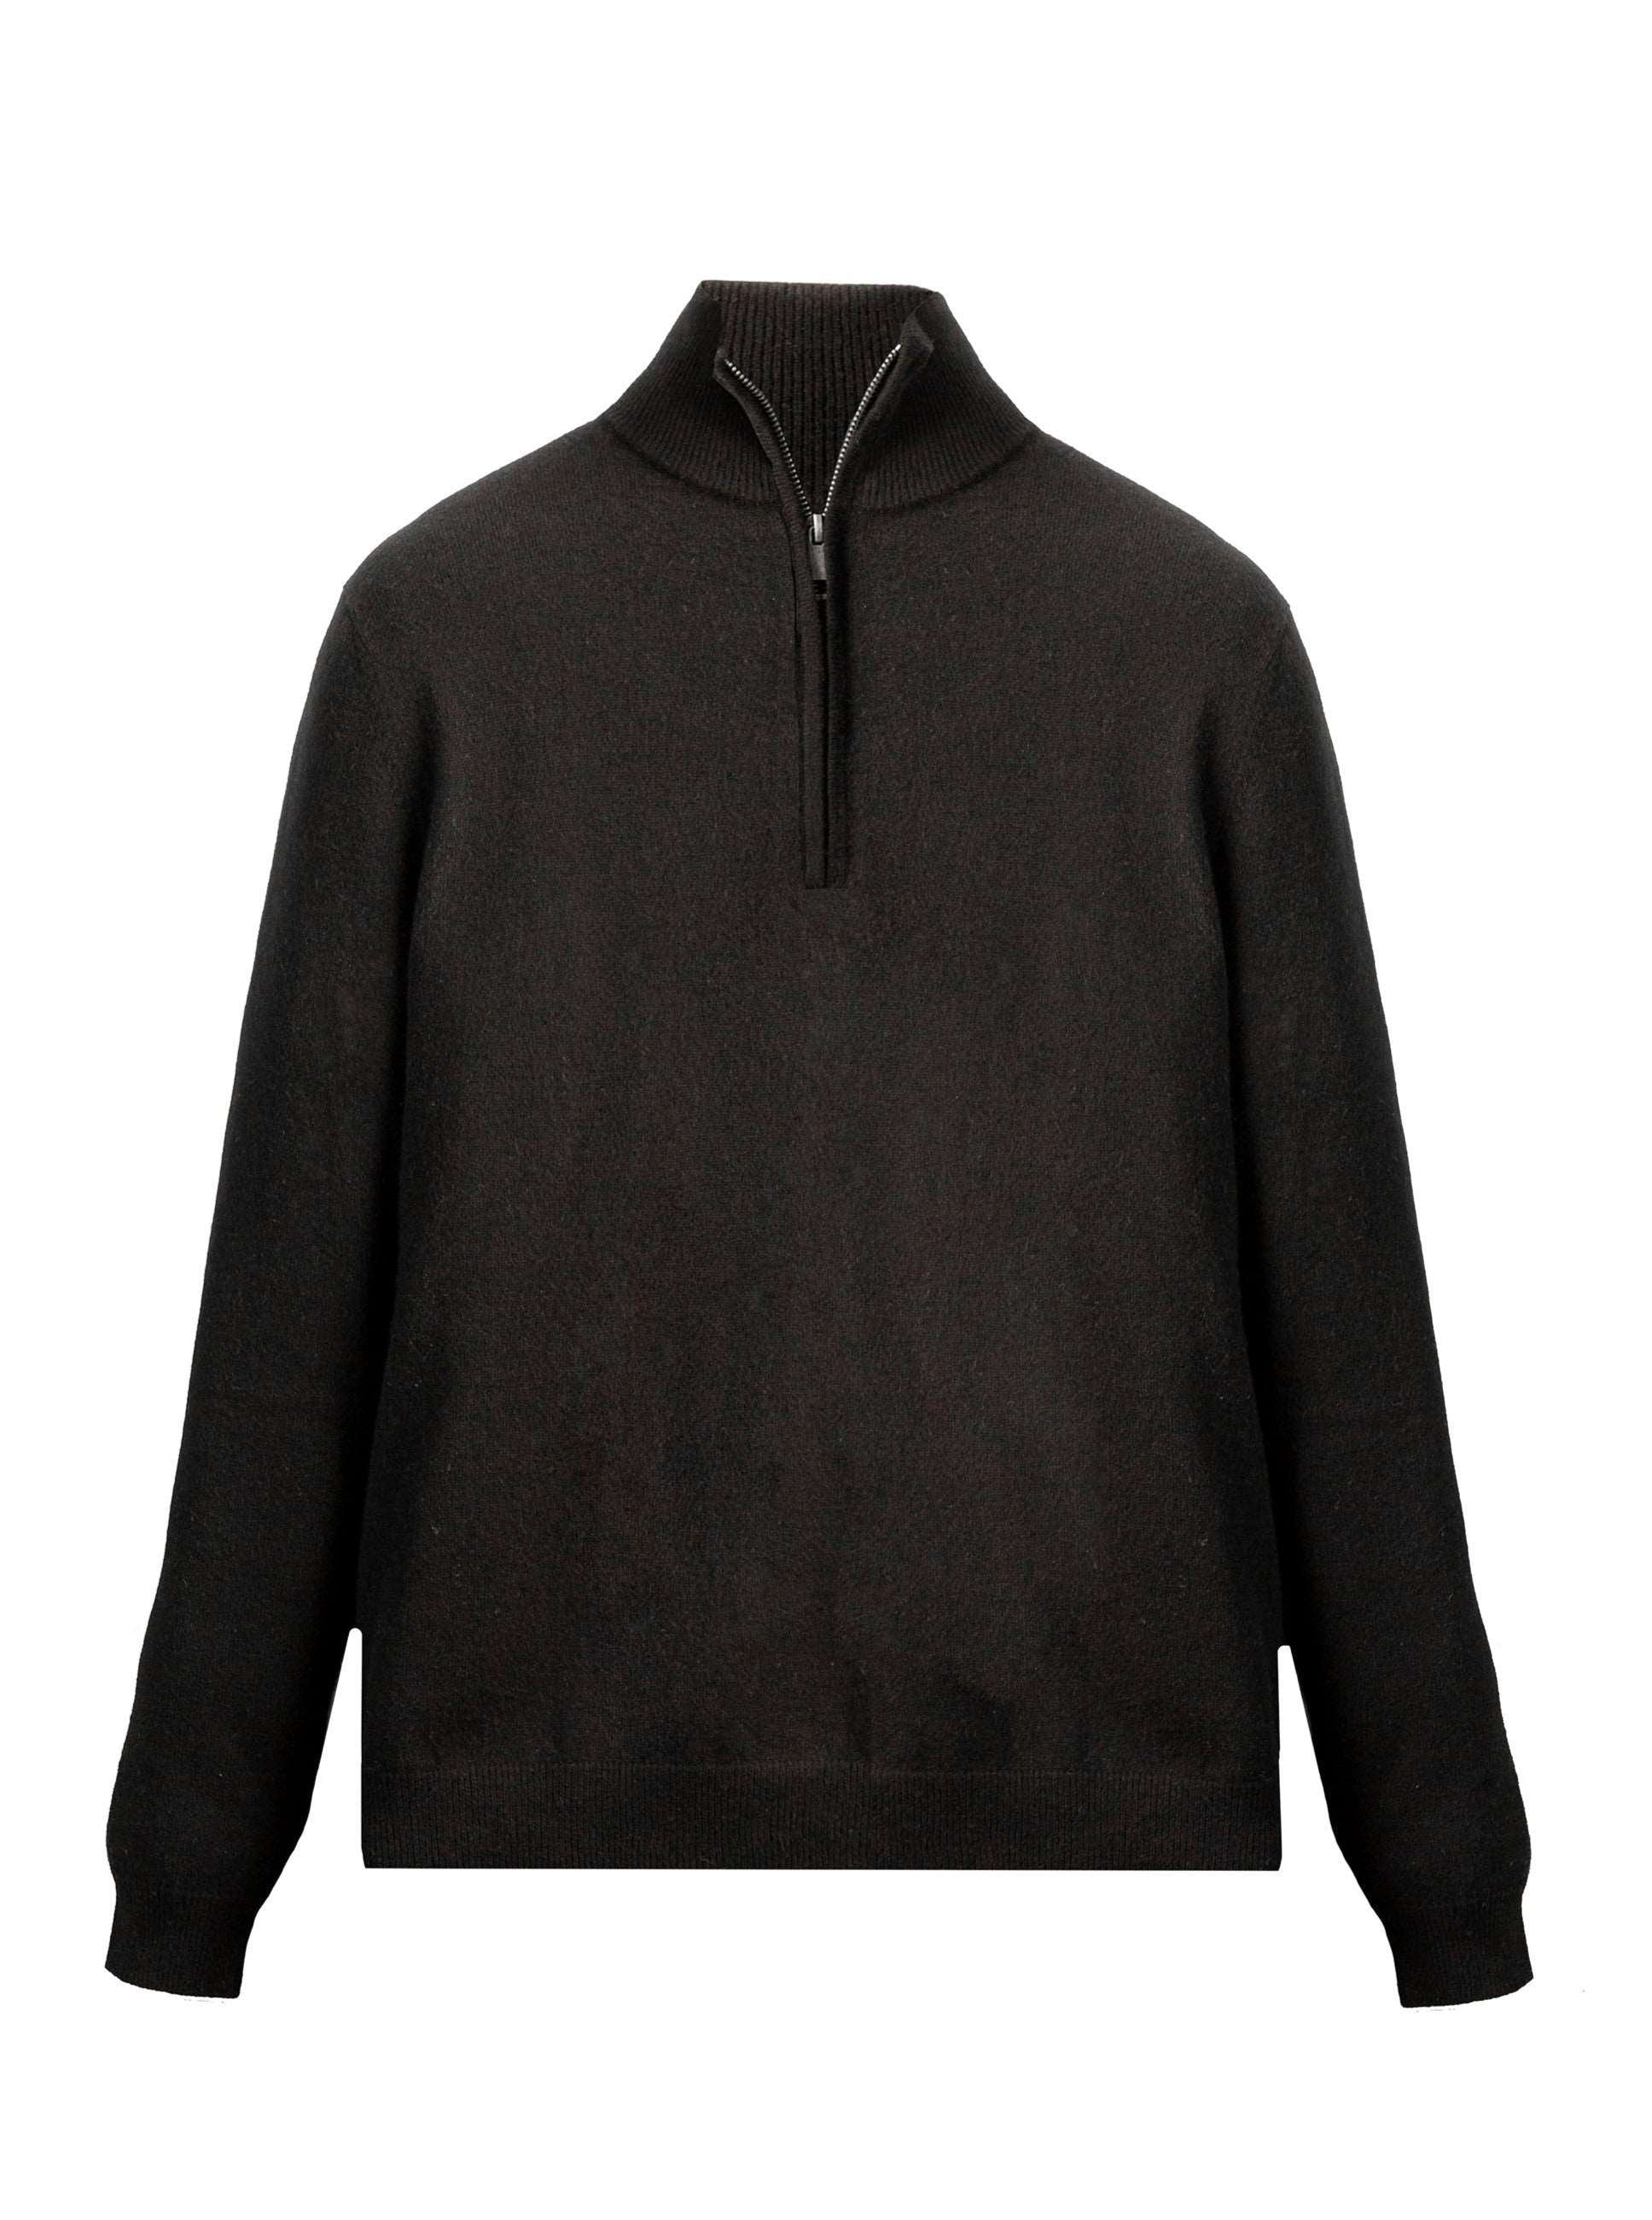 Gent's Zip Neck Cashmere Sweater | Made to Order